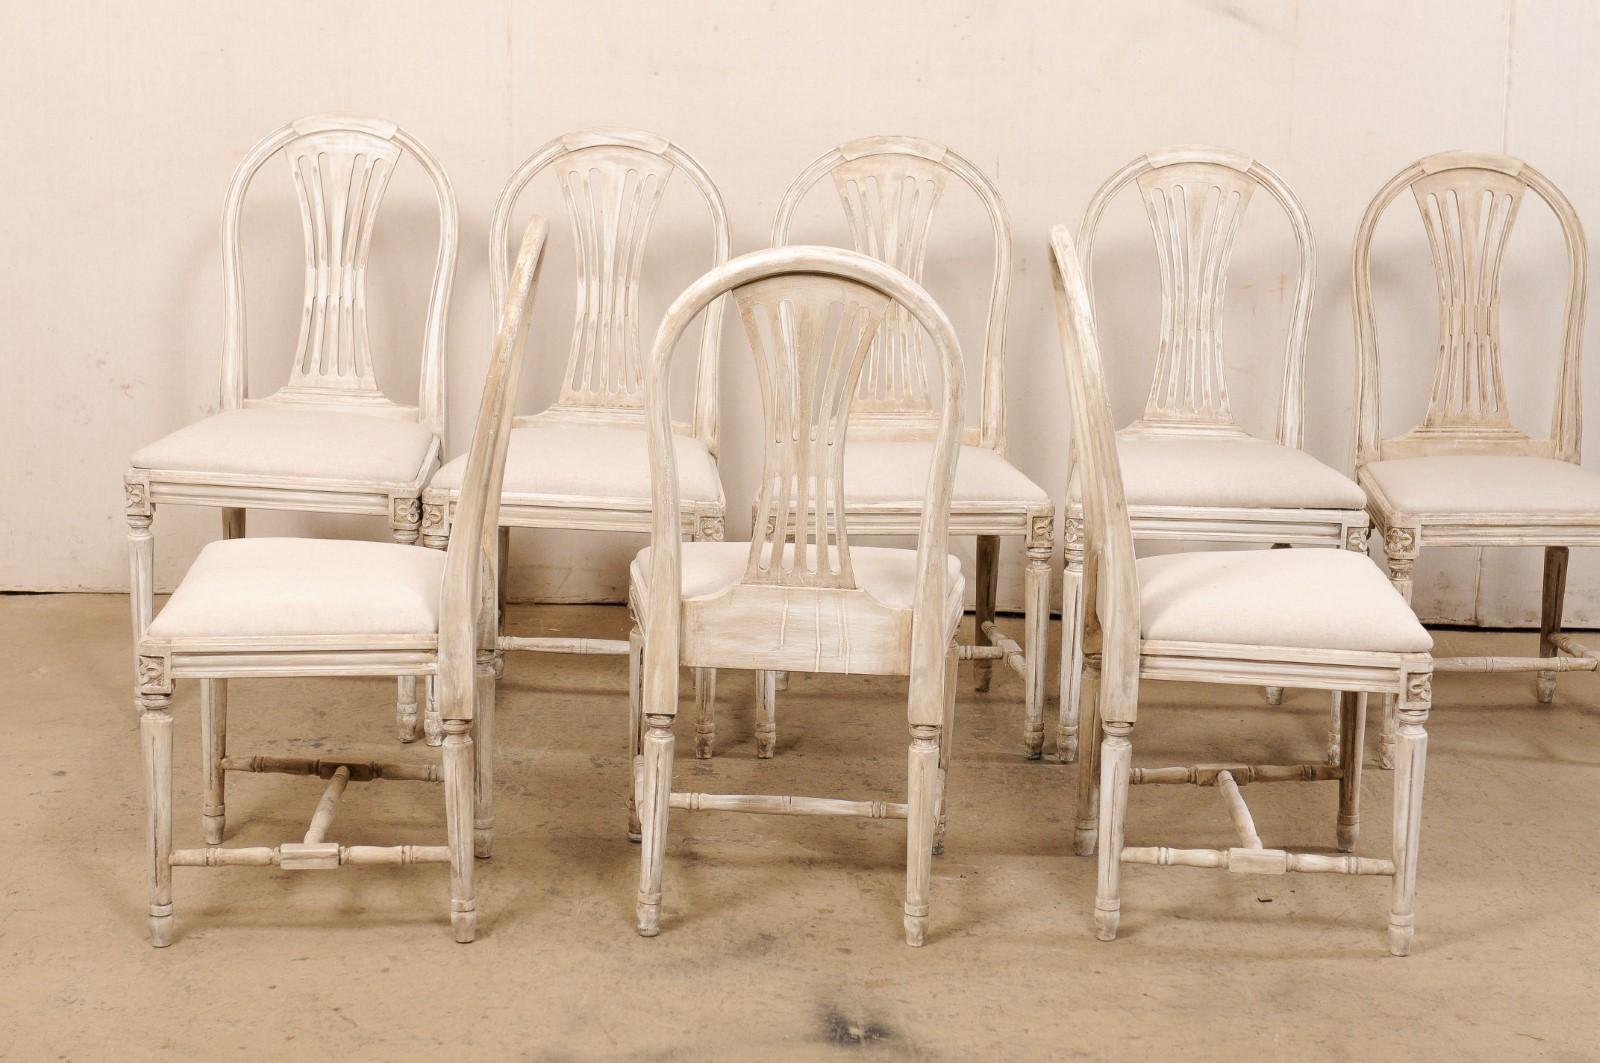 20th Century Swedish Set of 8 Gustavian-Style Armchairs with Custom Upholstered Seats